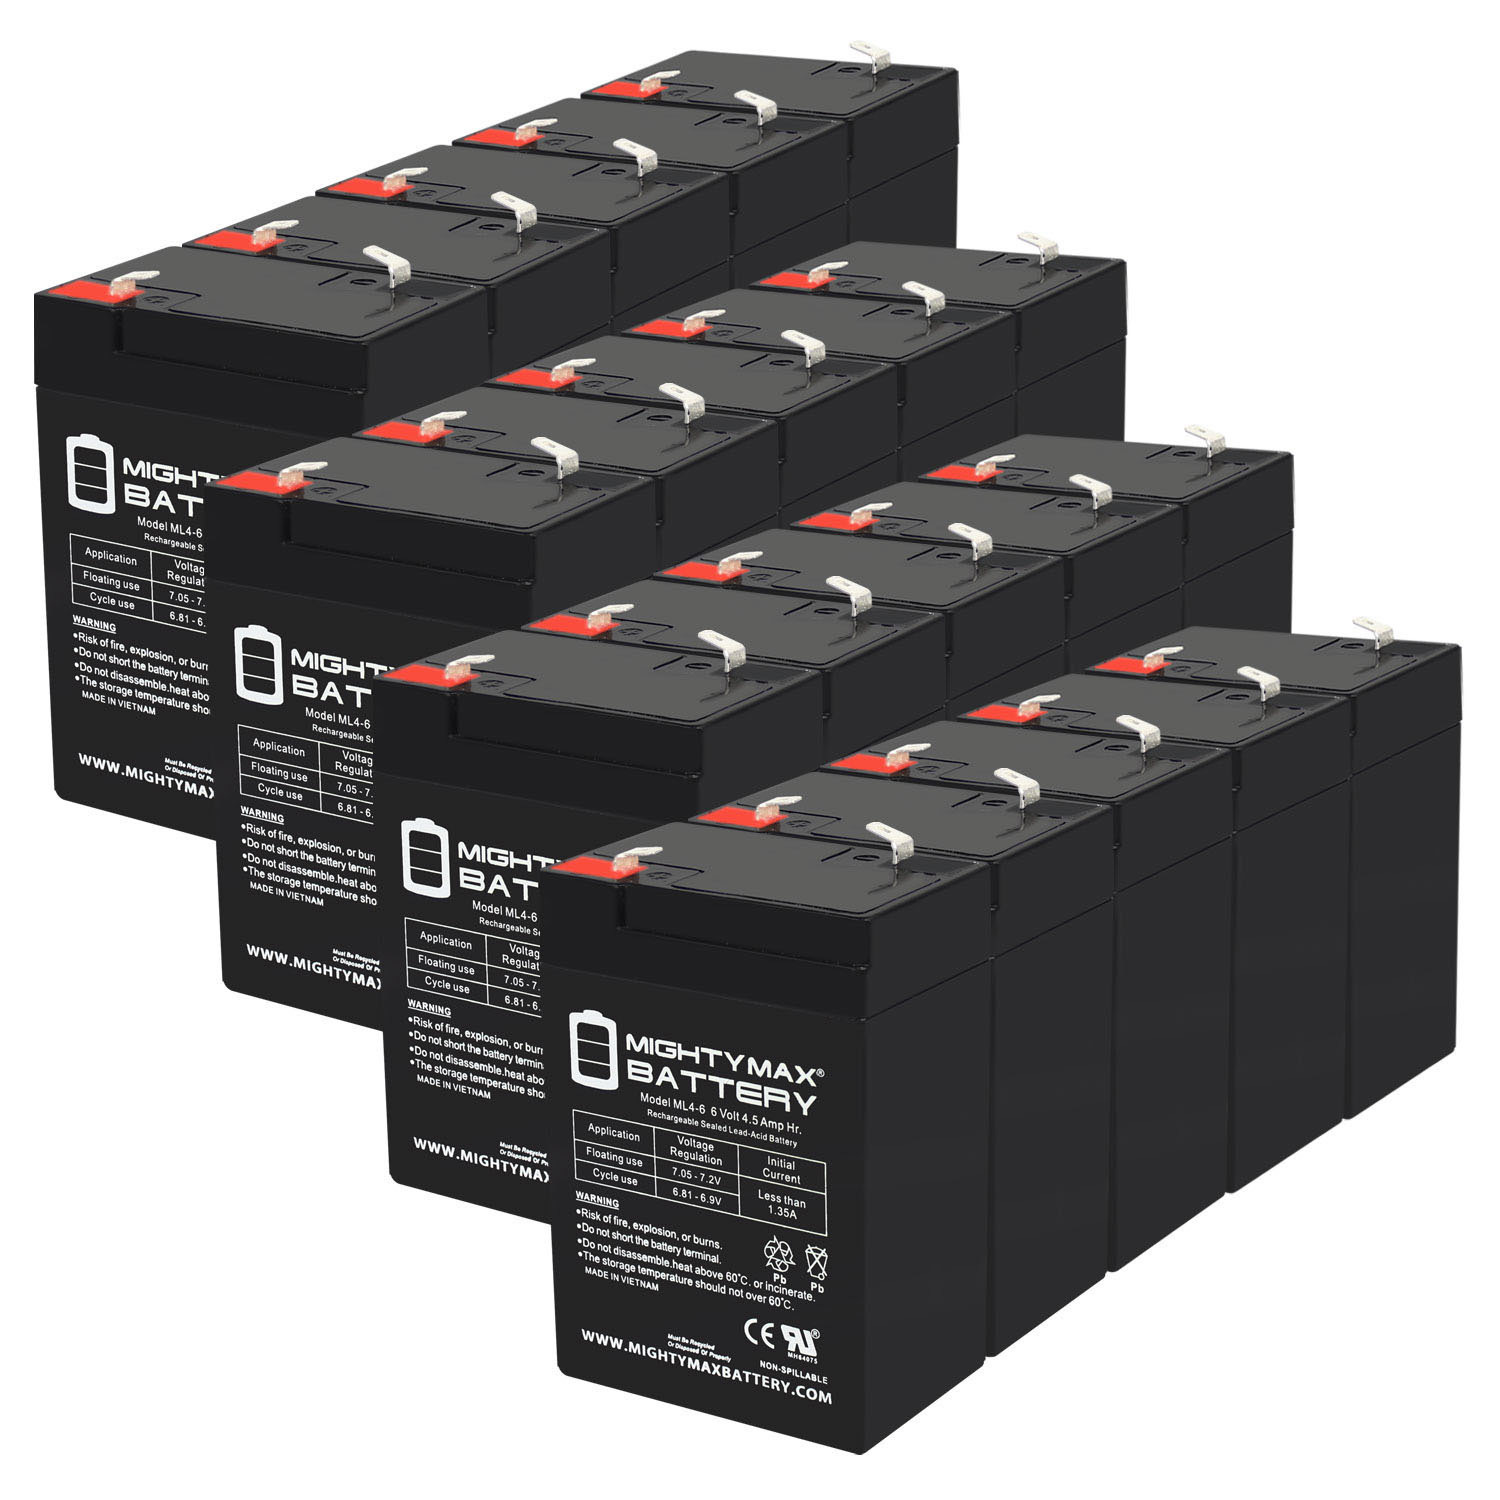 6V 4.5AH SLA Replacement Battery for Dual-Lite ML-4S - 20 Pack